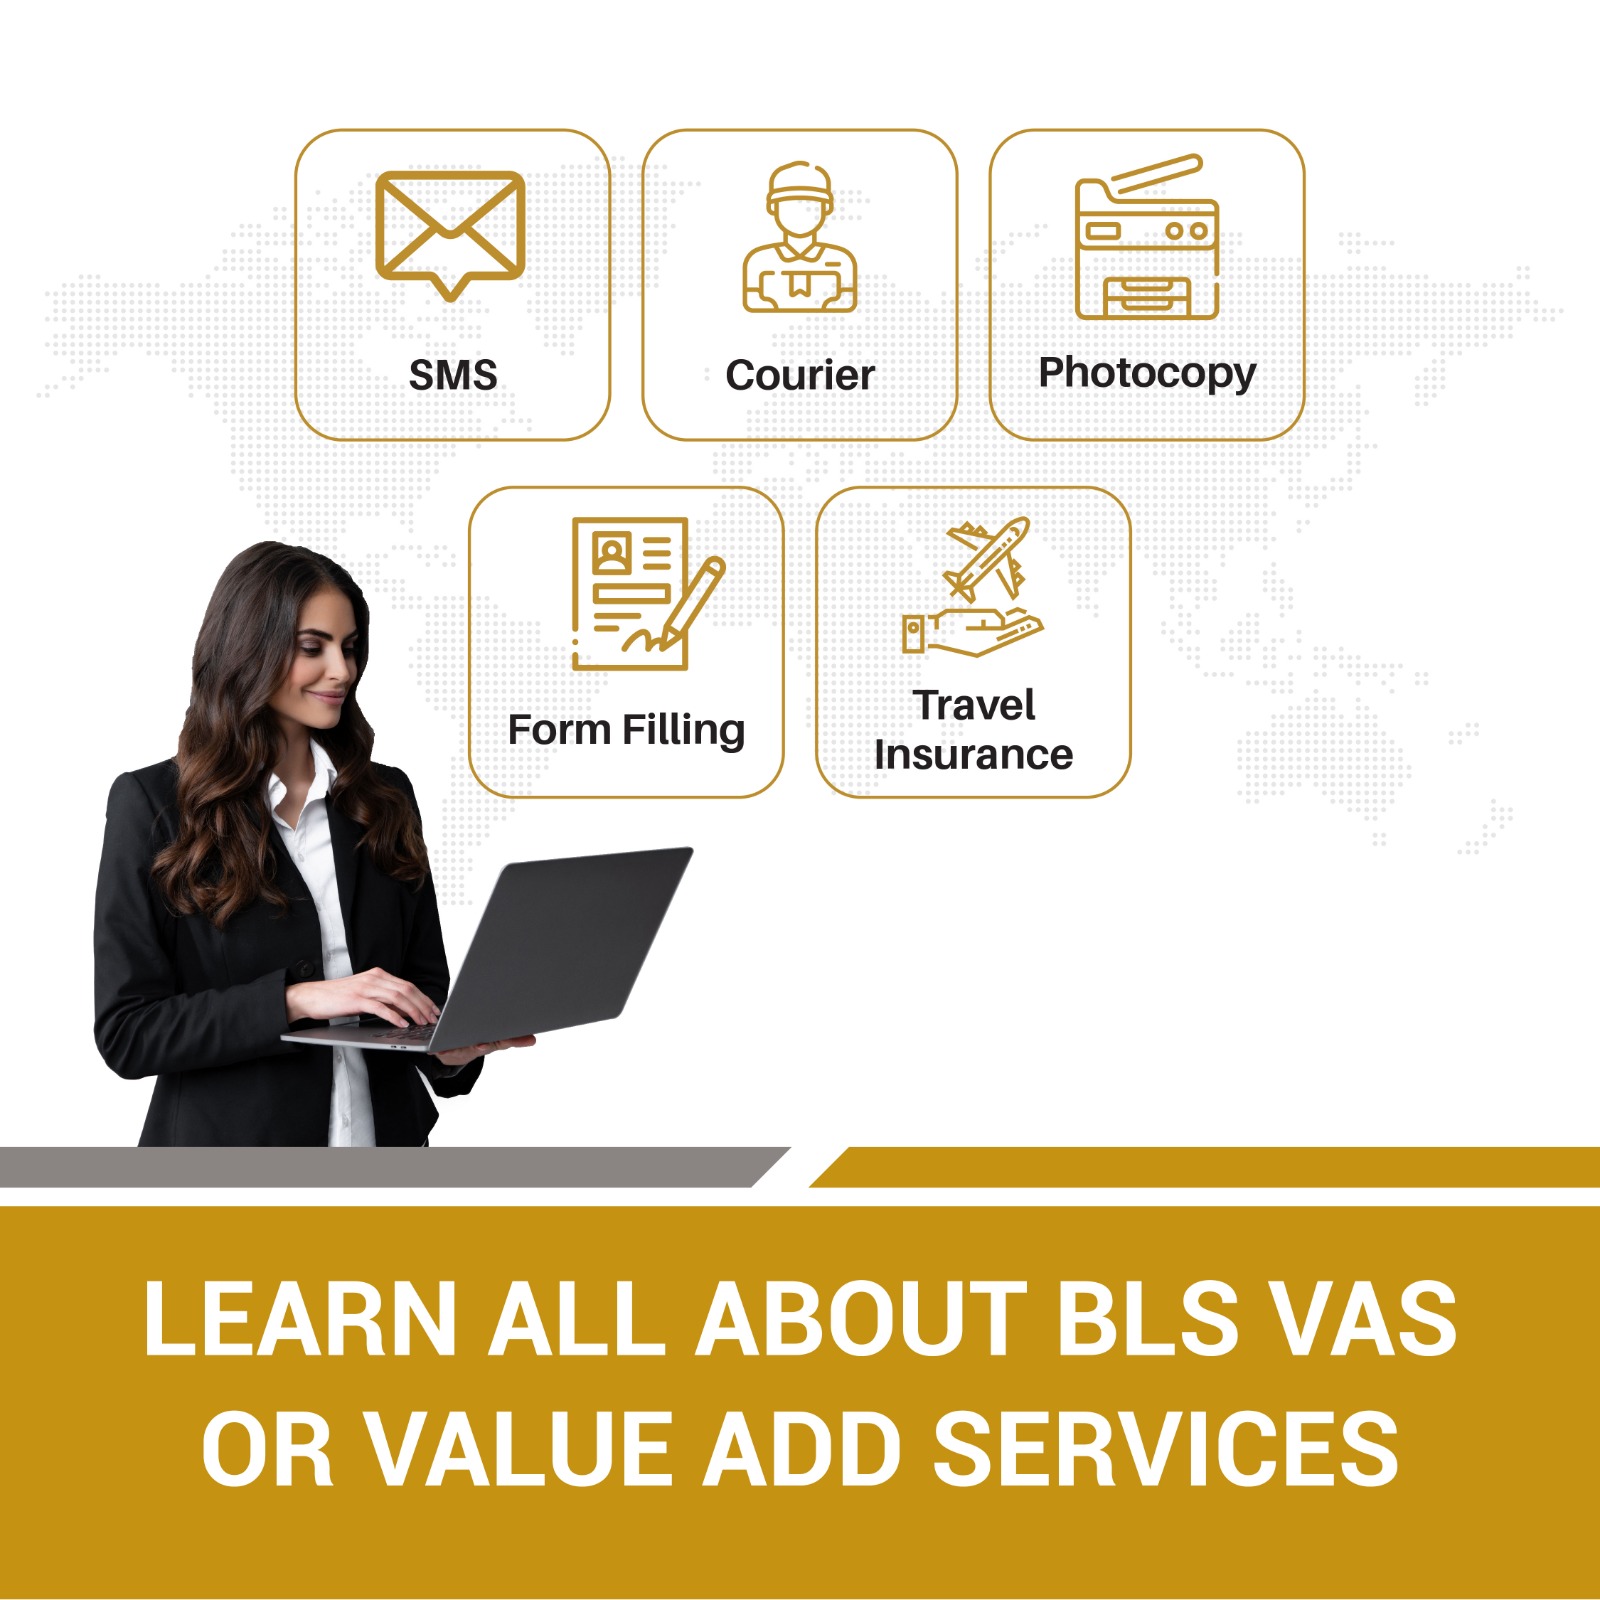 Learn All About BLS VAS or Value Add Services